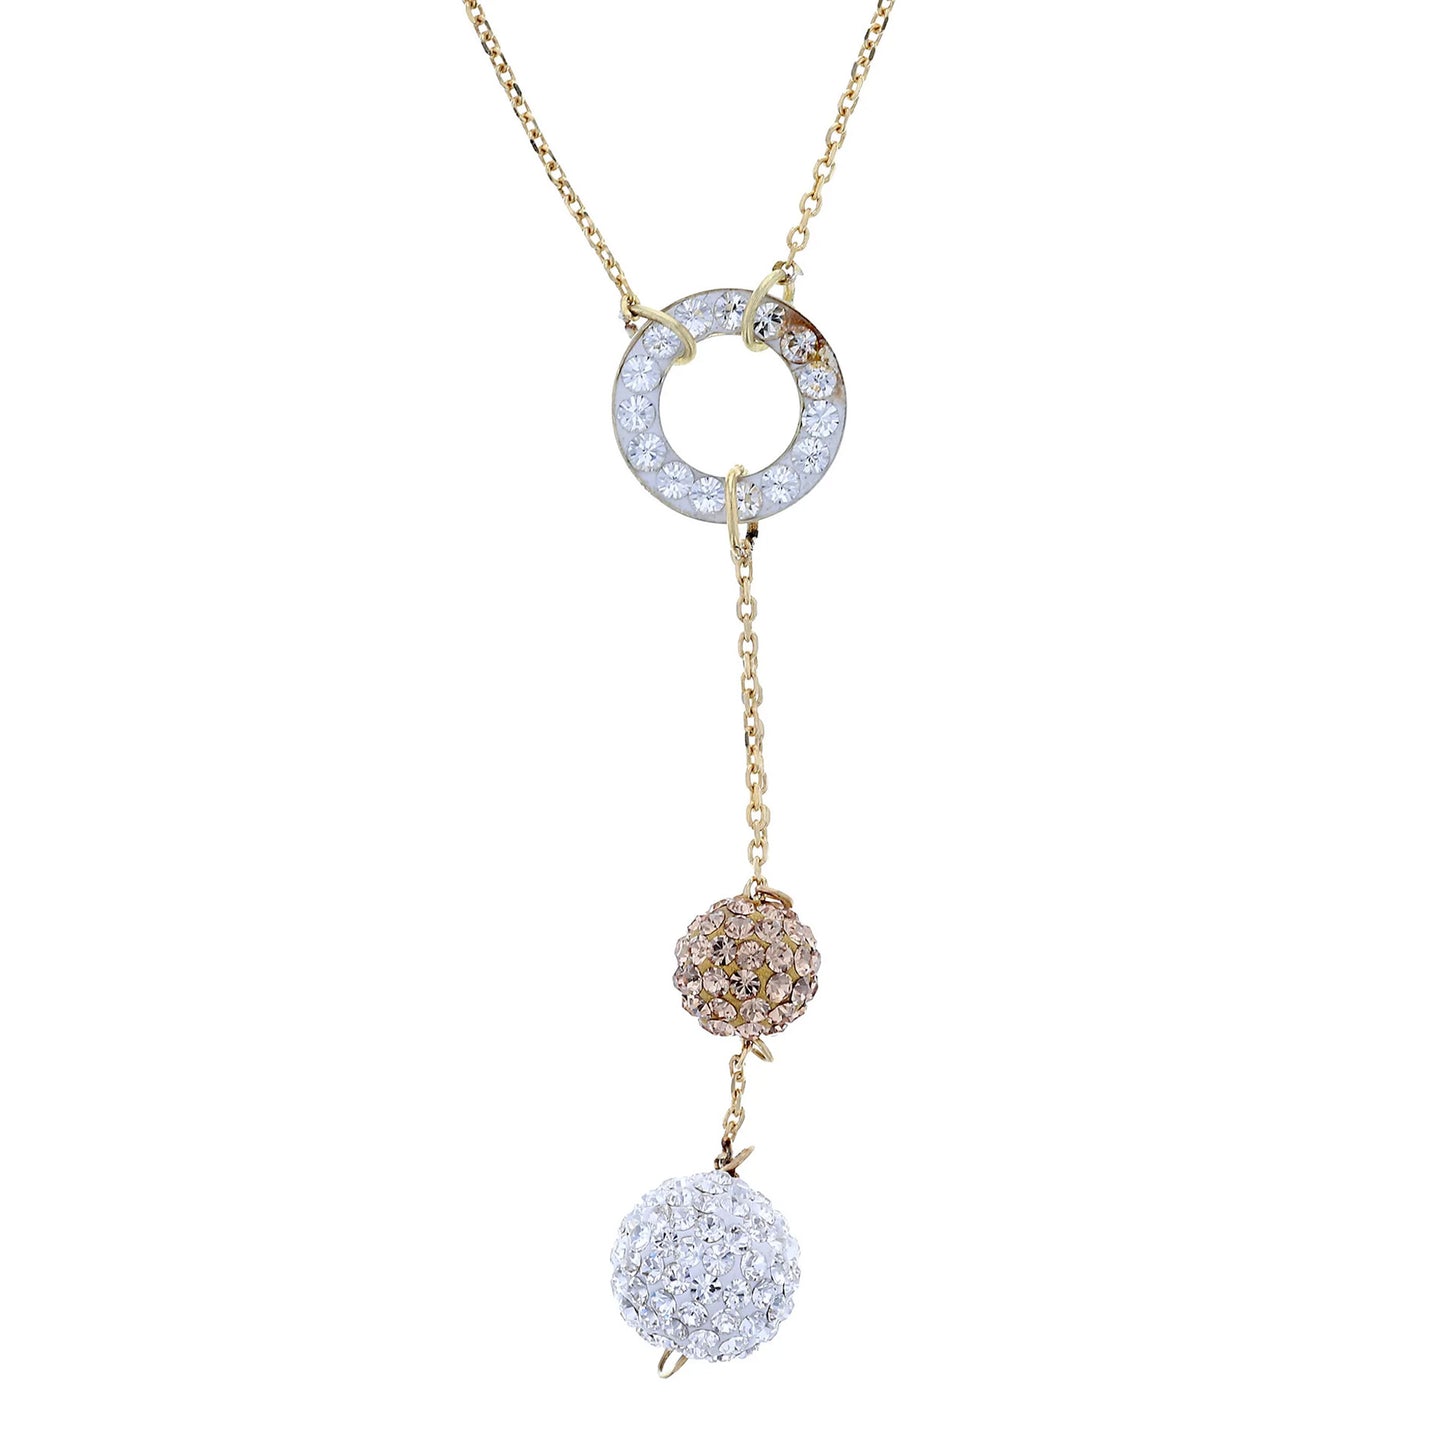 18K Gold Plated Sterling Silver Circle Drop Necklace with Crystal balls White and Light Colorado Topaz Crystals.